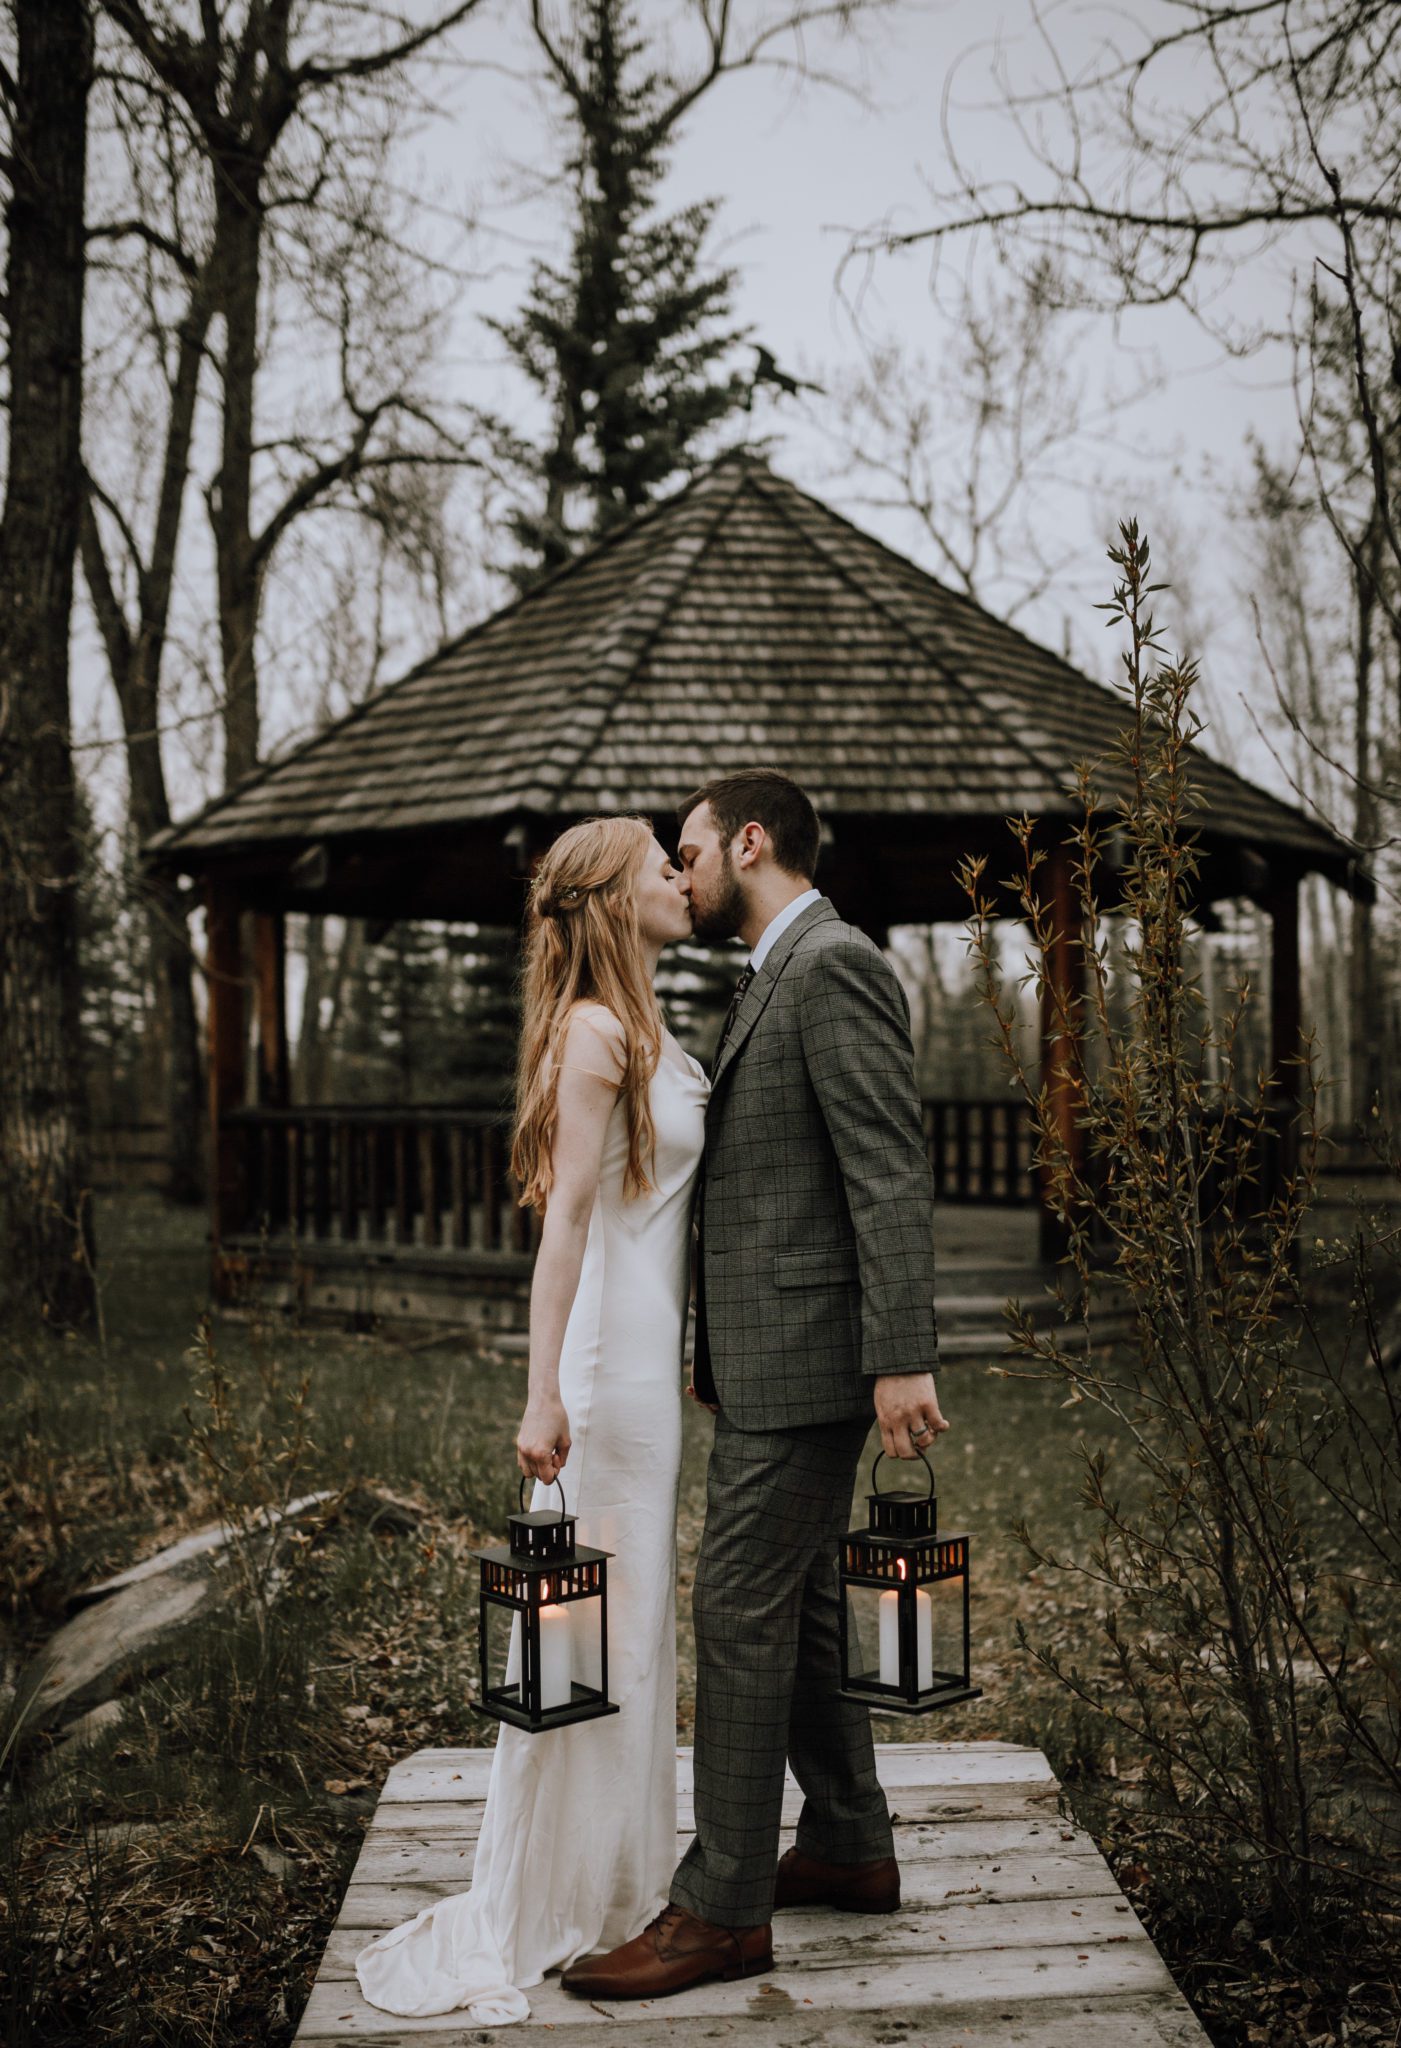 Dark and moody wedding inspiration from Born in Mud Bay Photography